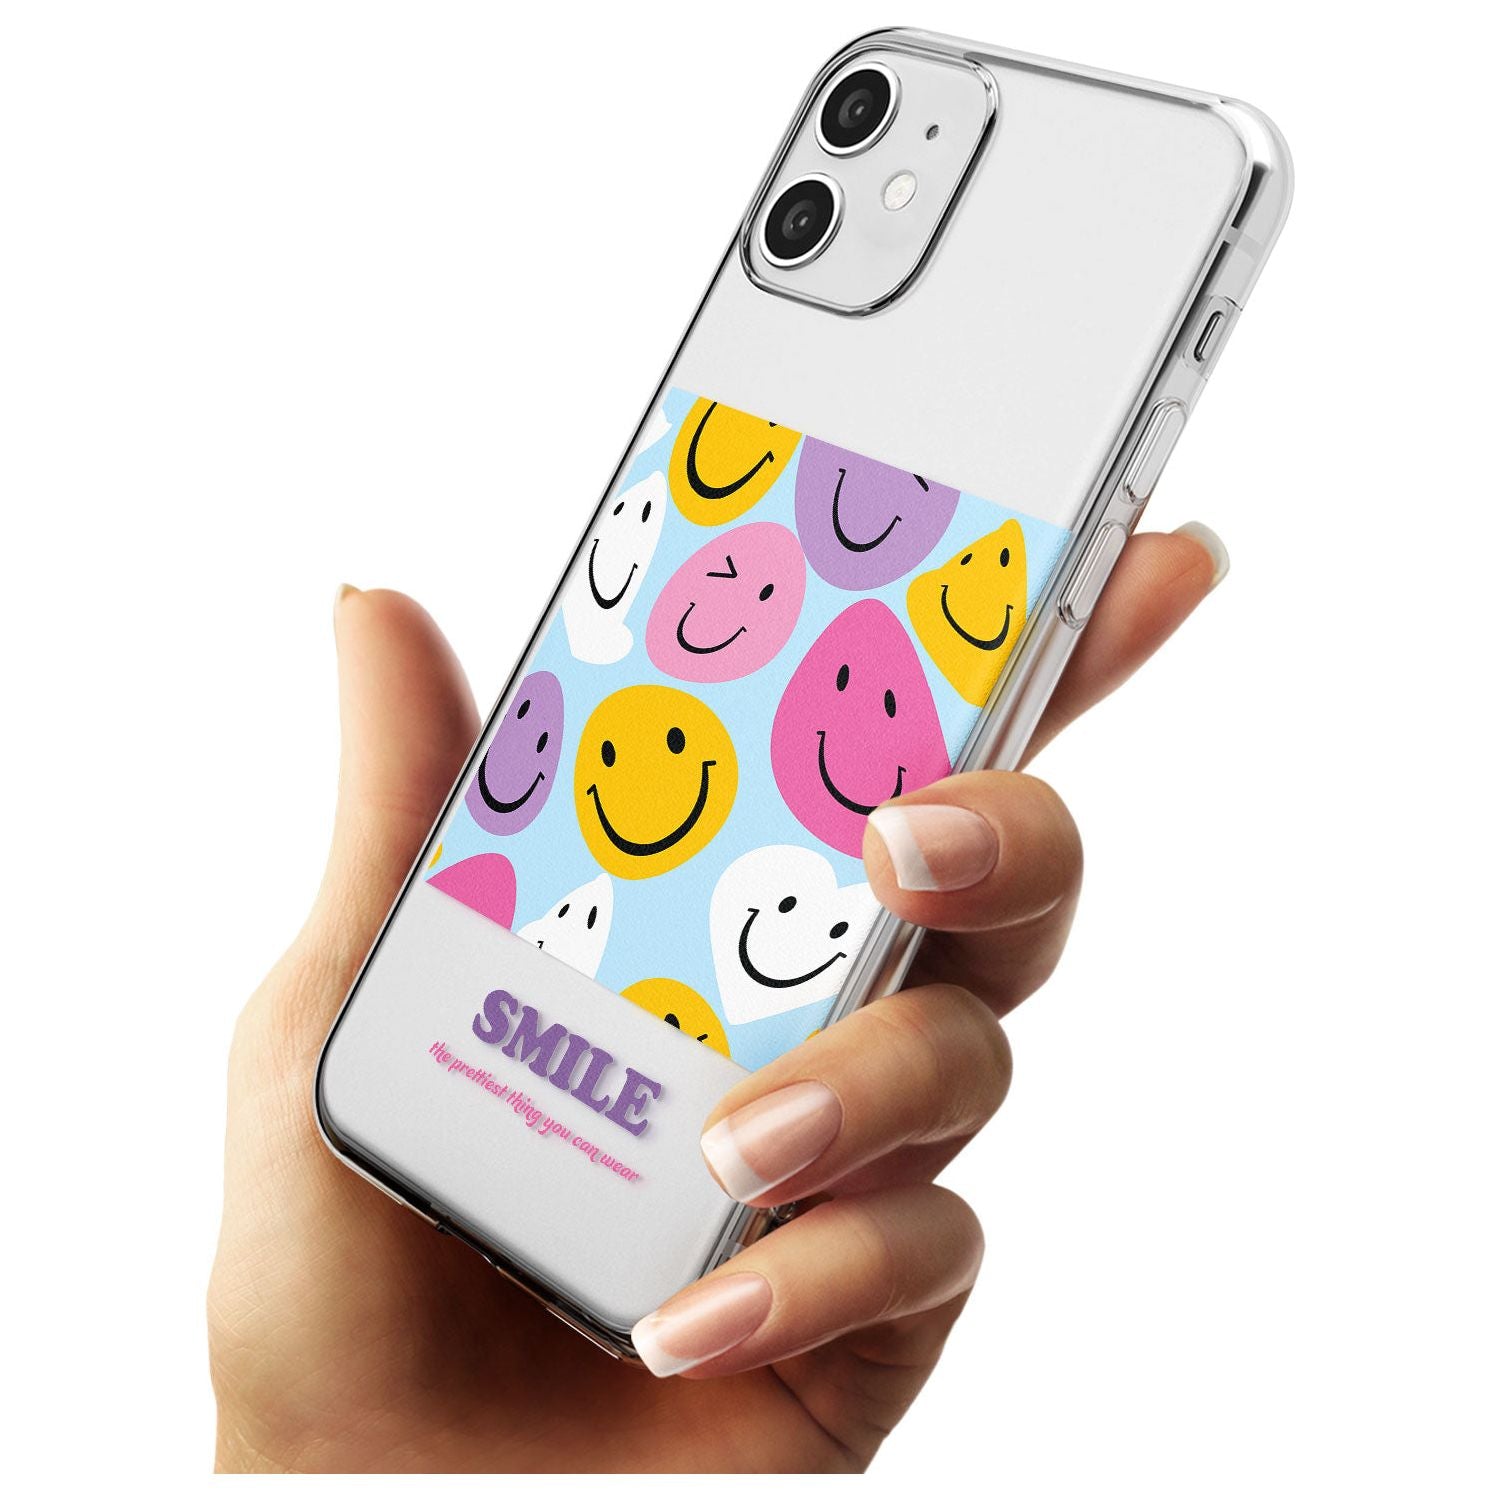 A Smile Slim TPU Phone Case for iPhone 11